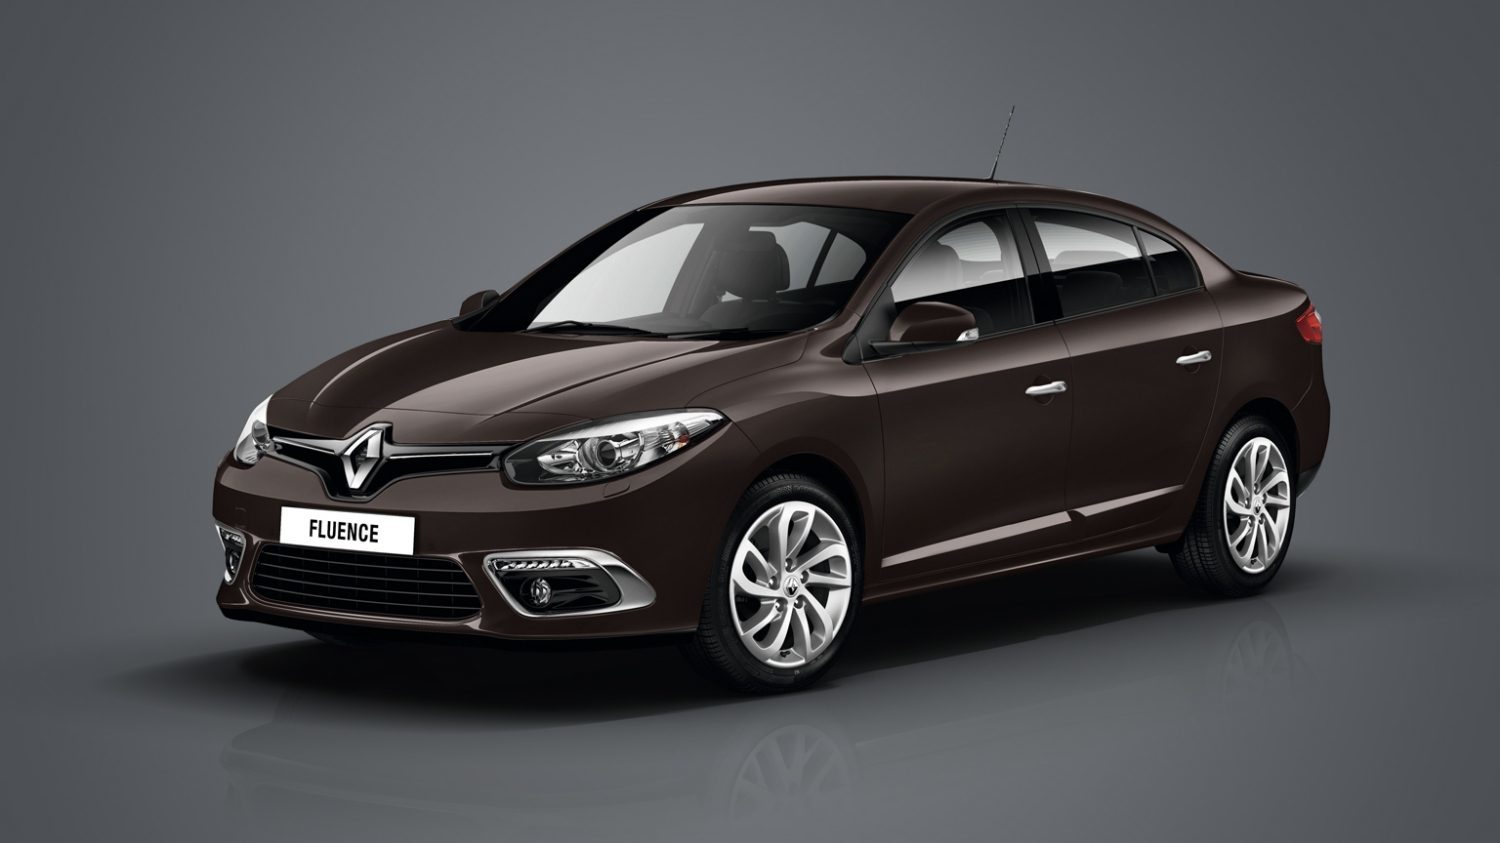 <span style="font-weight: bold;">Renault Fluence</span>